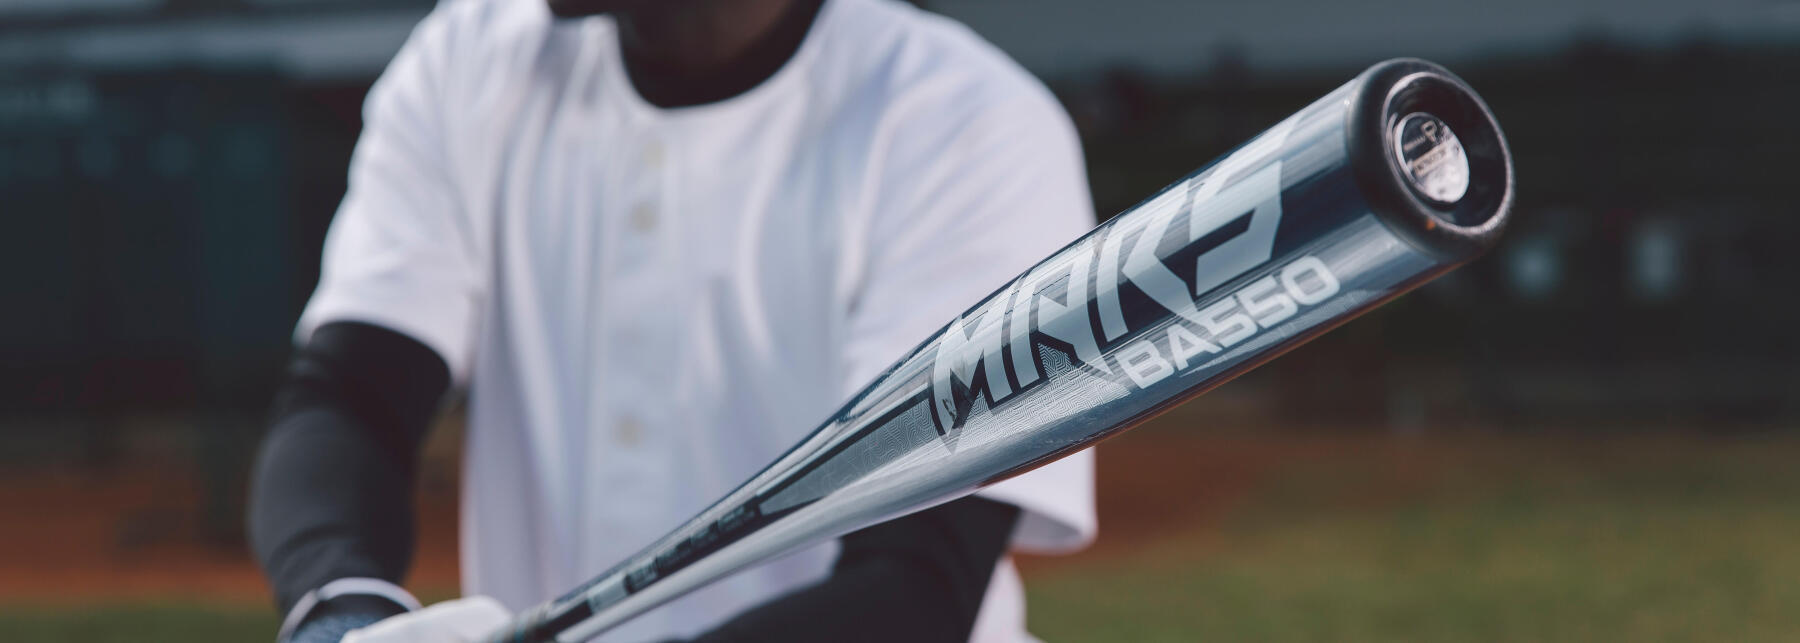 Baseball｜Wood Bats vs. Aluminum Bats: What Are the Differences?